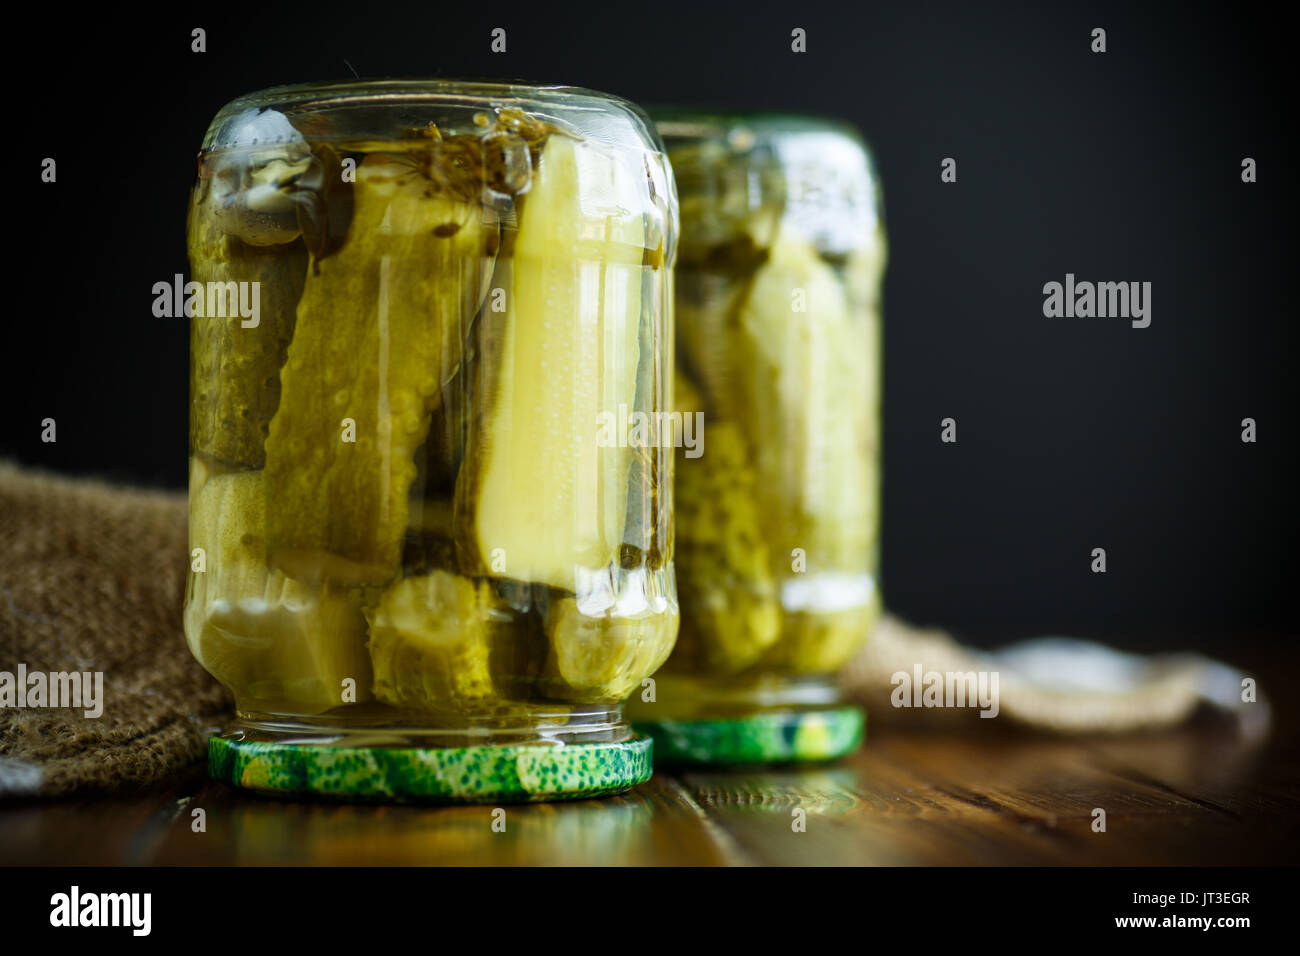 Home preservation. Canned in a glass jar ripe cucumber . Stock Photo